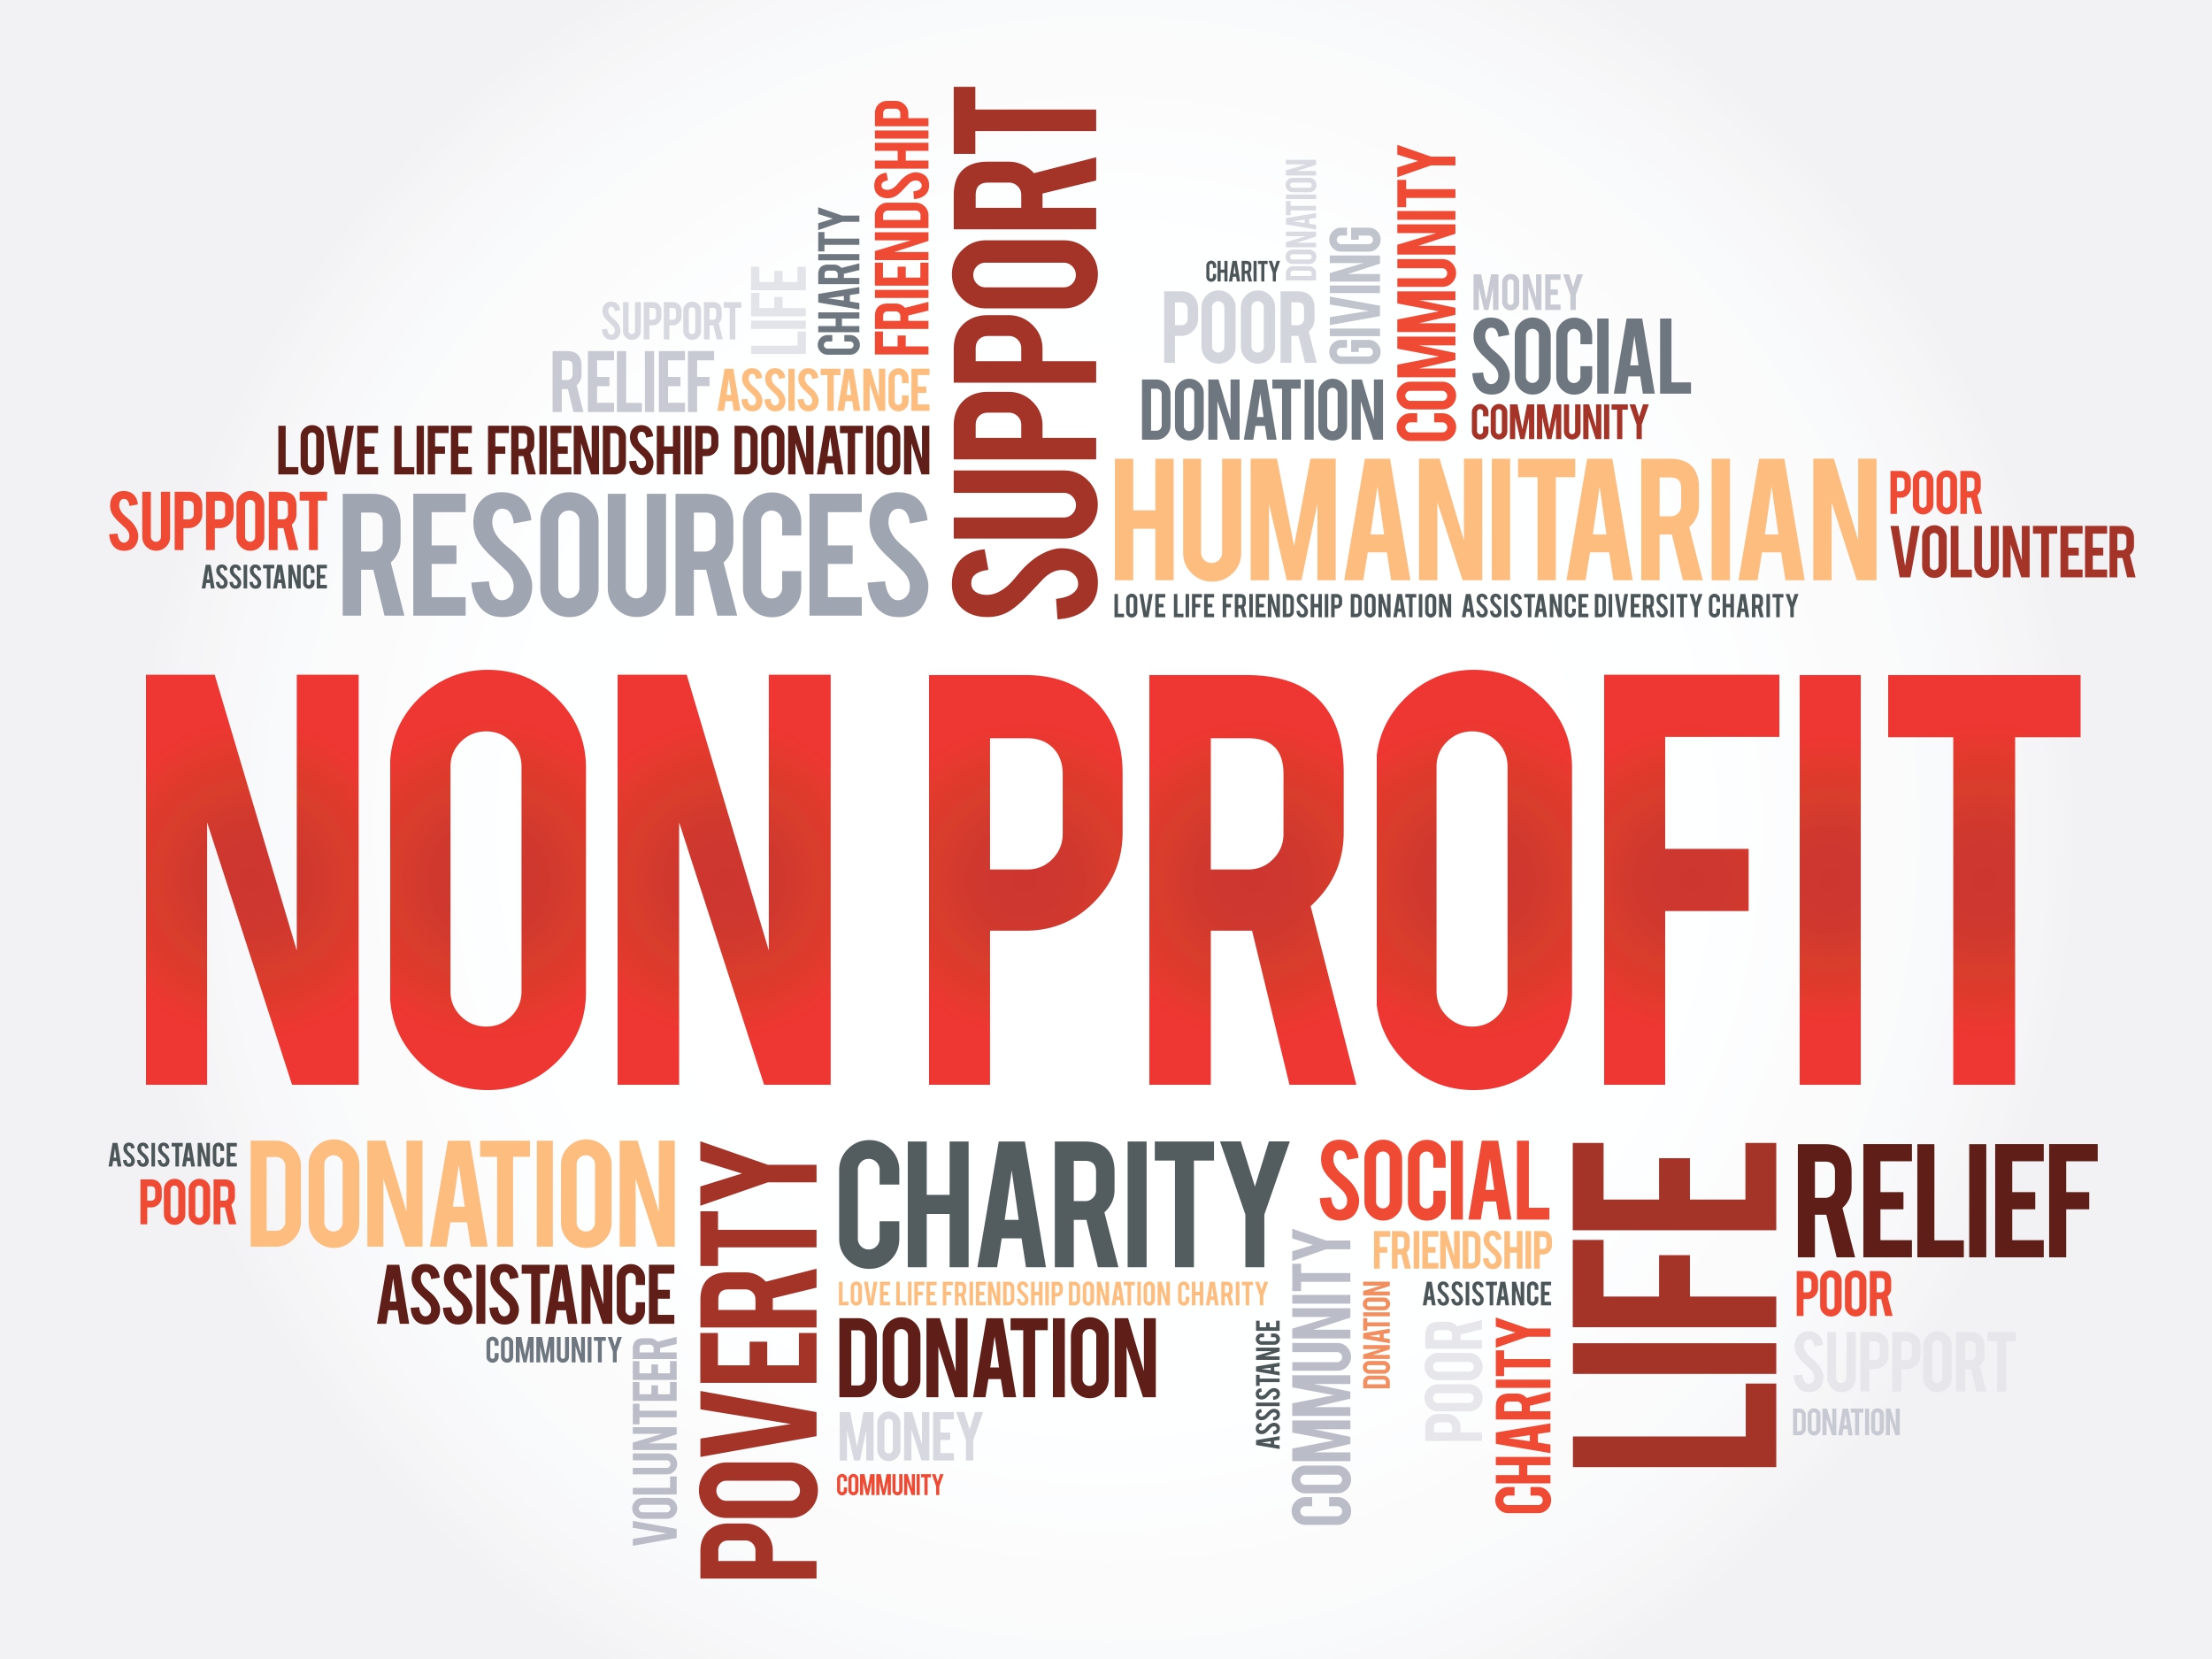 How To Build A Successful NonProfit The Purple Circle